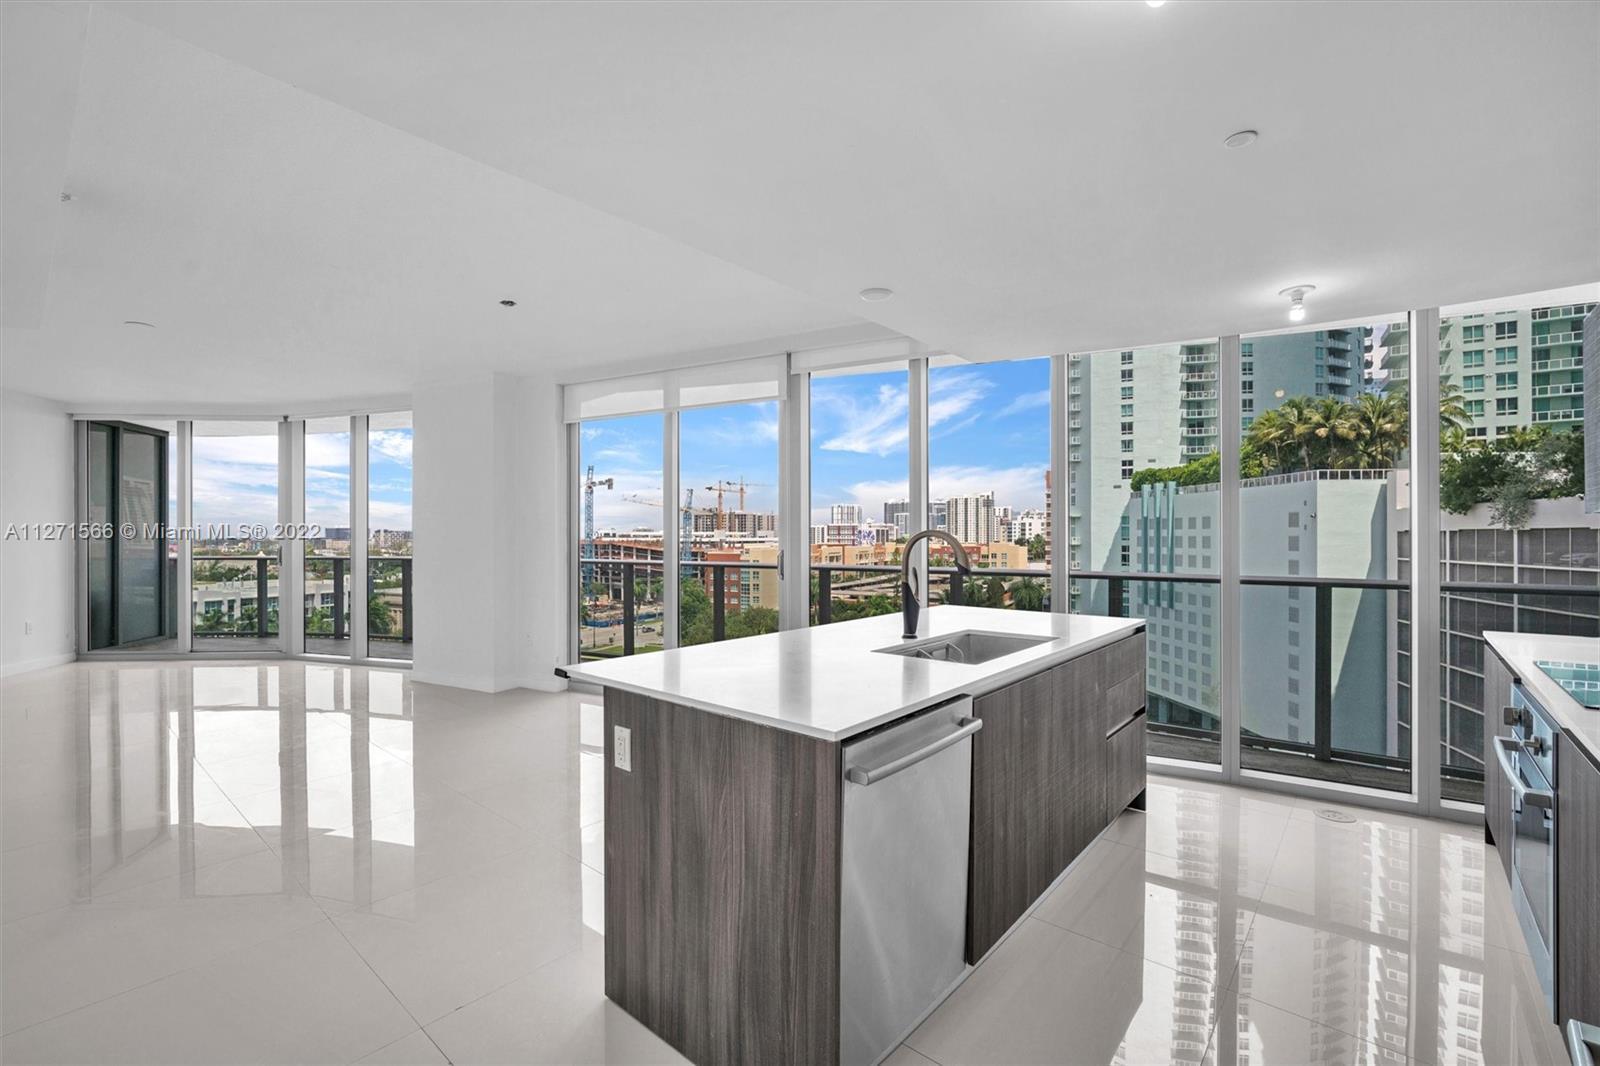 1,441 sq ft on Aria On The Bay 2 beds 2 & half Baths corner unit with  Fabulous amenities that inclu